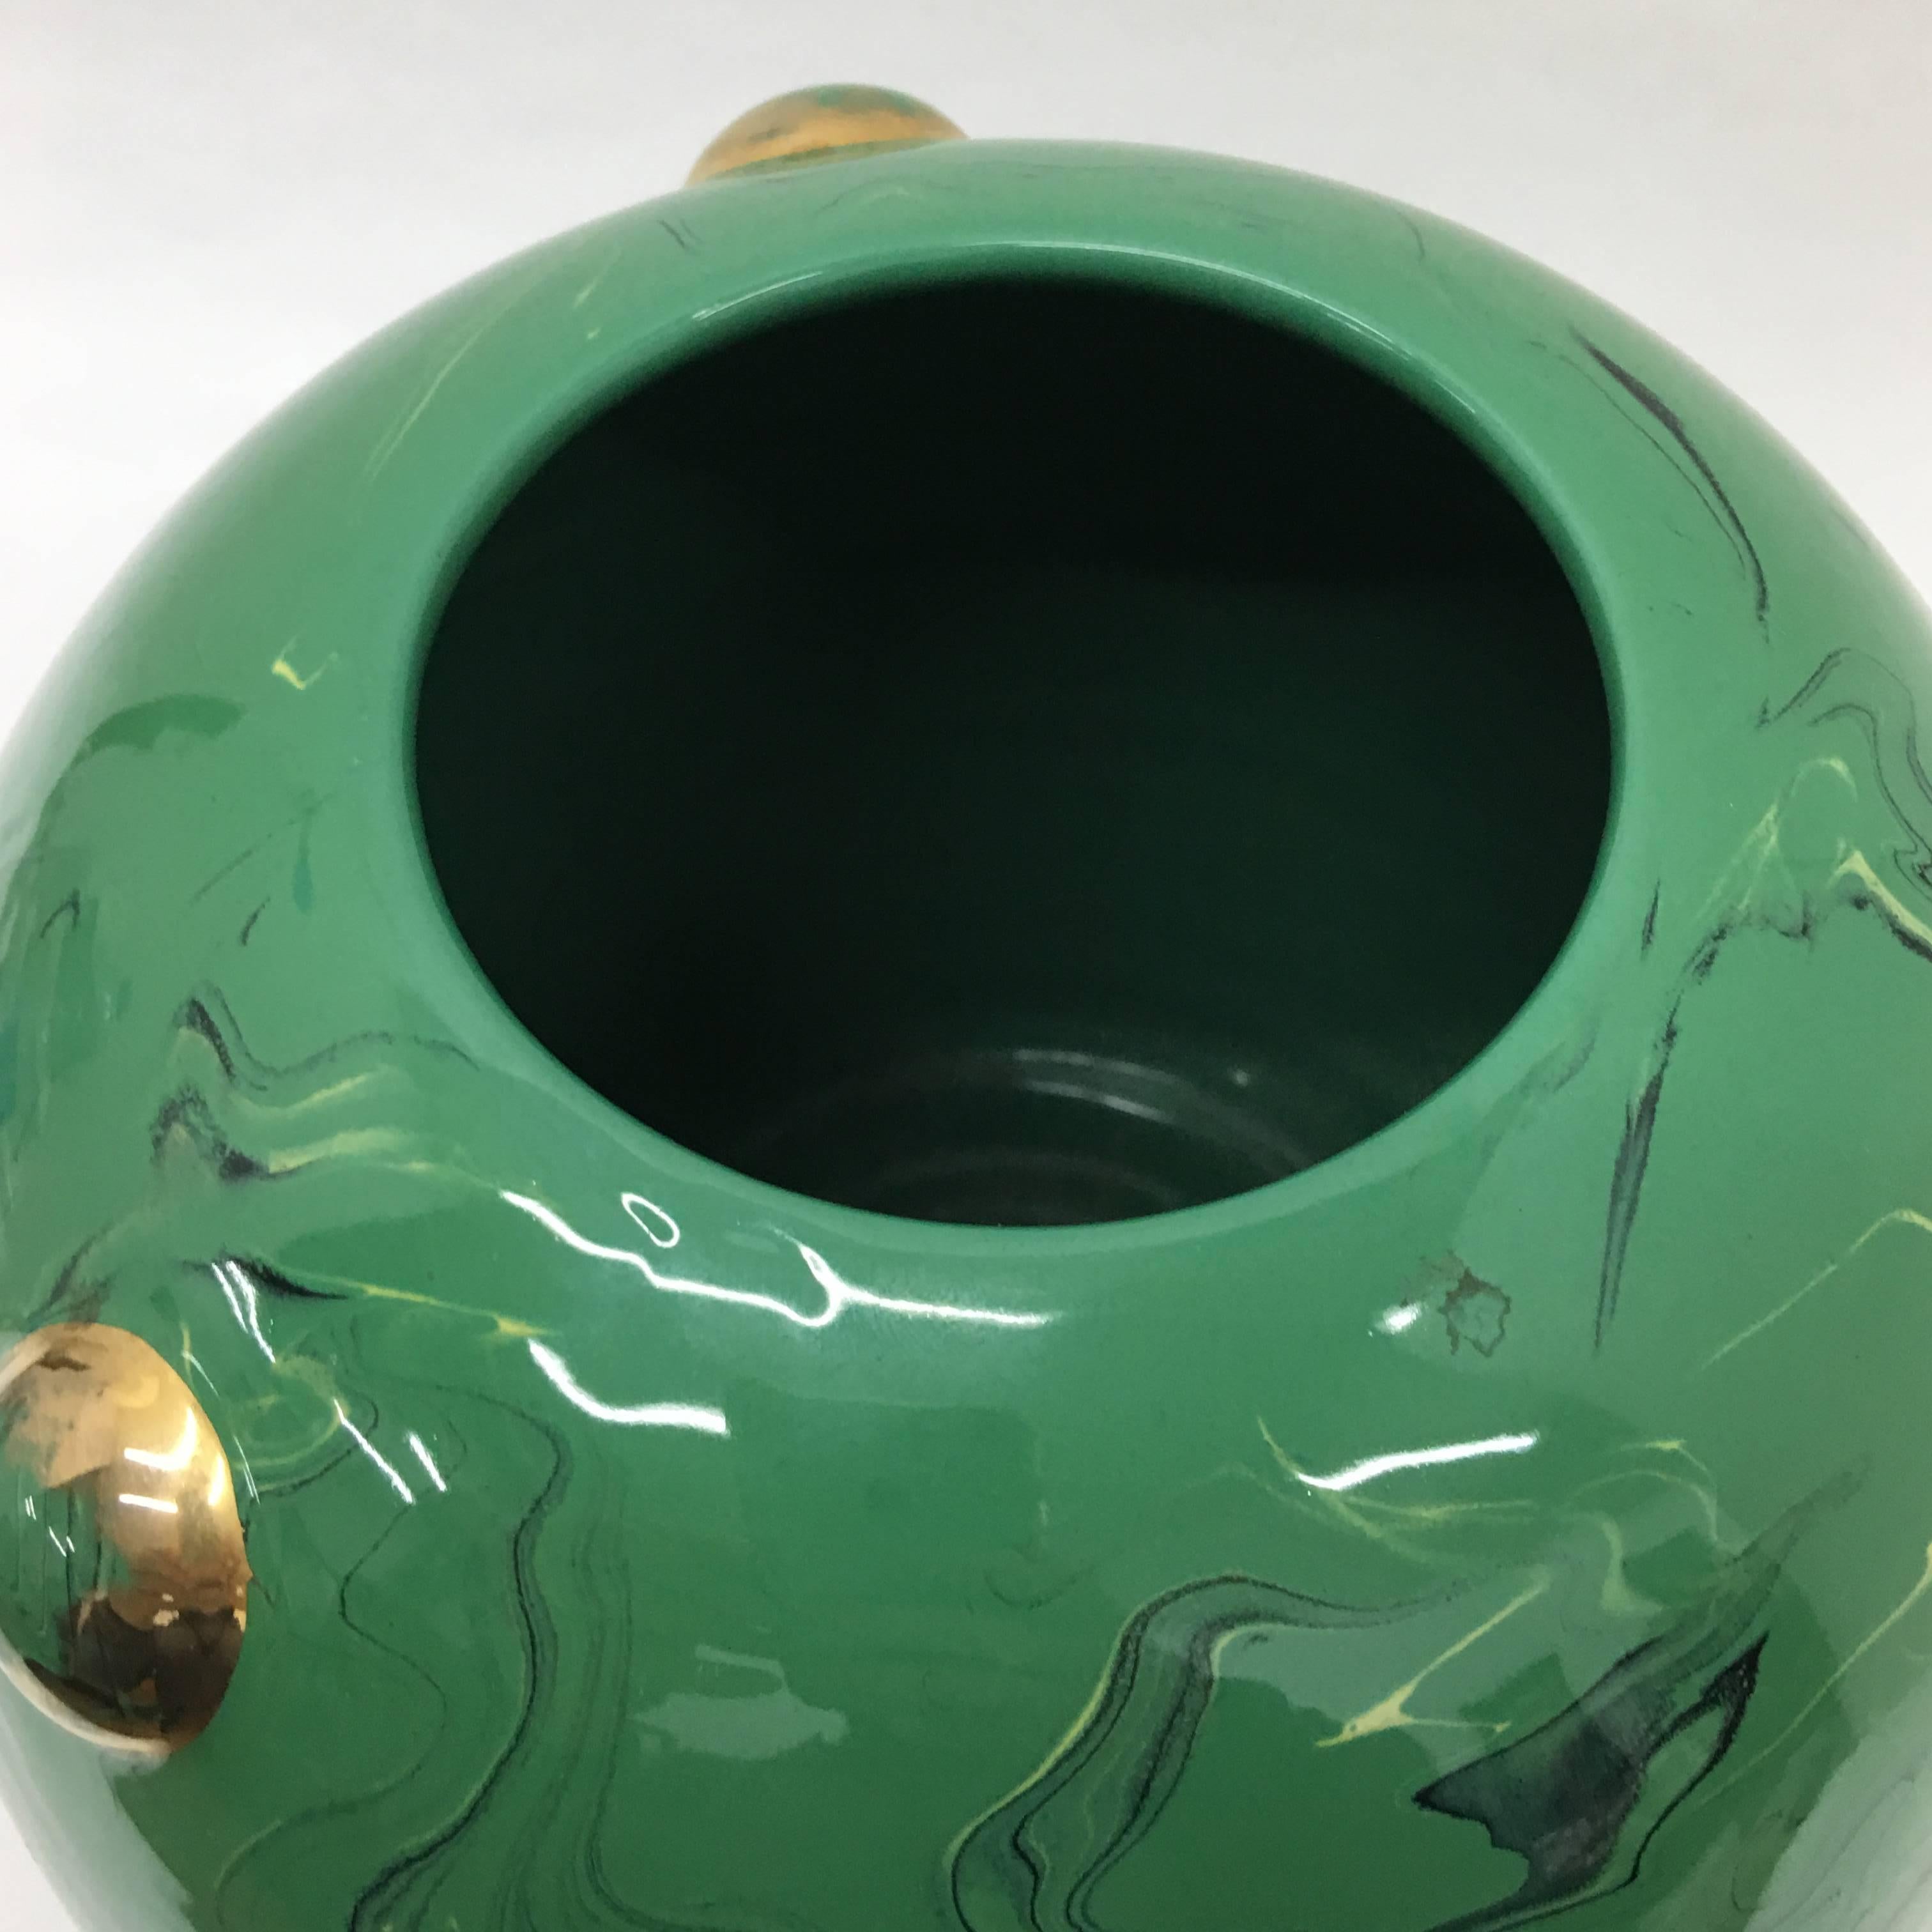 Amazing round ceramic vase, made in Florence in the 1950s, green marbled effect and gold, signed on the bottom Batignani.